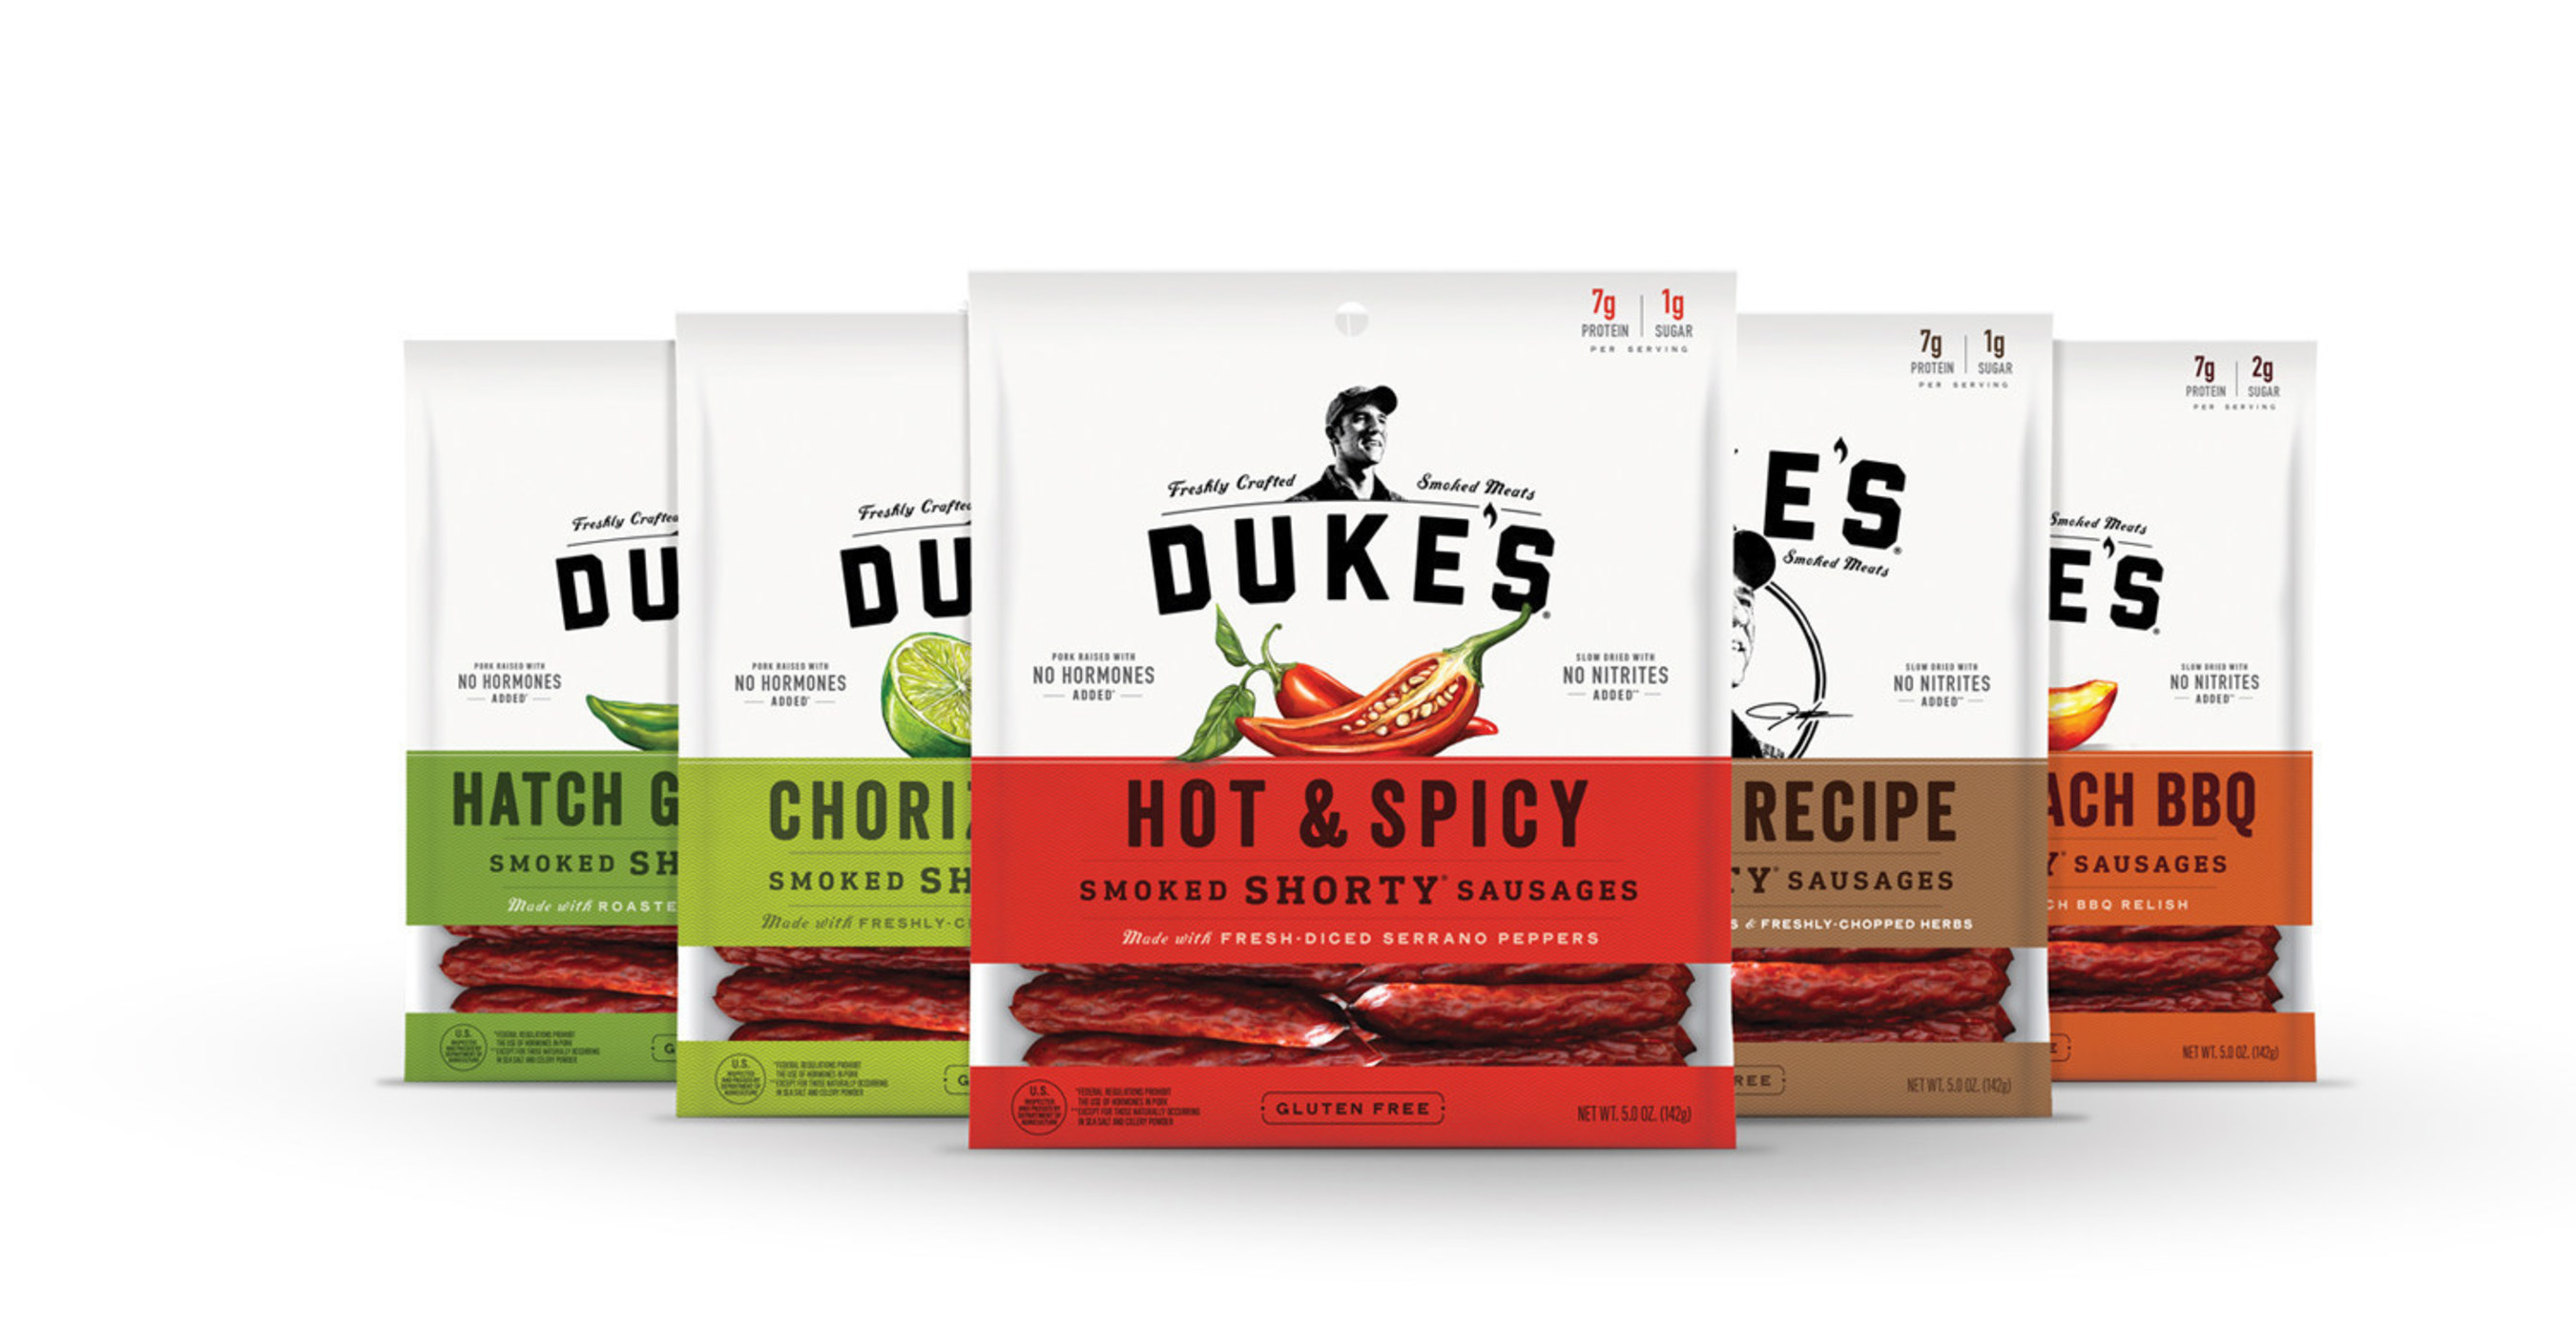 Duke's new Smoked Shorty(R) Sausages. Sales of Duke's Smoked Shorty Sausages are up over 127 percent over last year, as the meat snack category continues to grow.